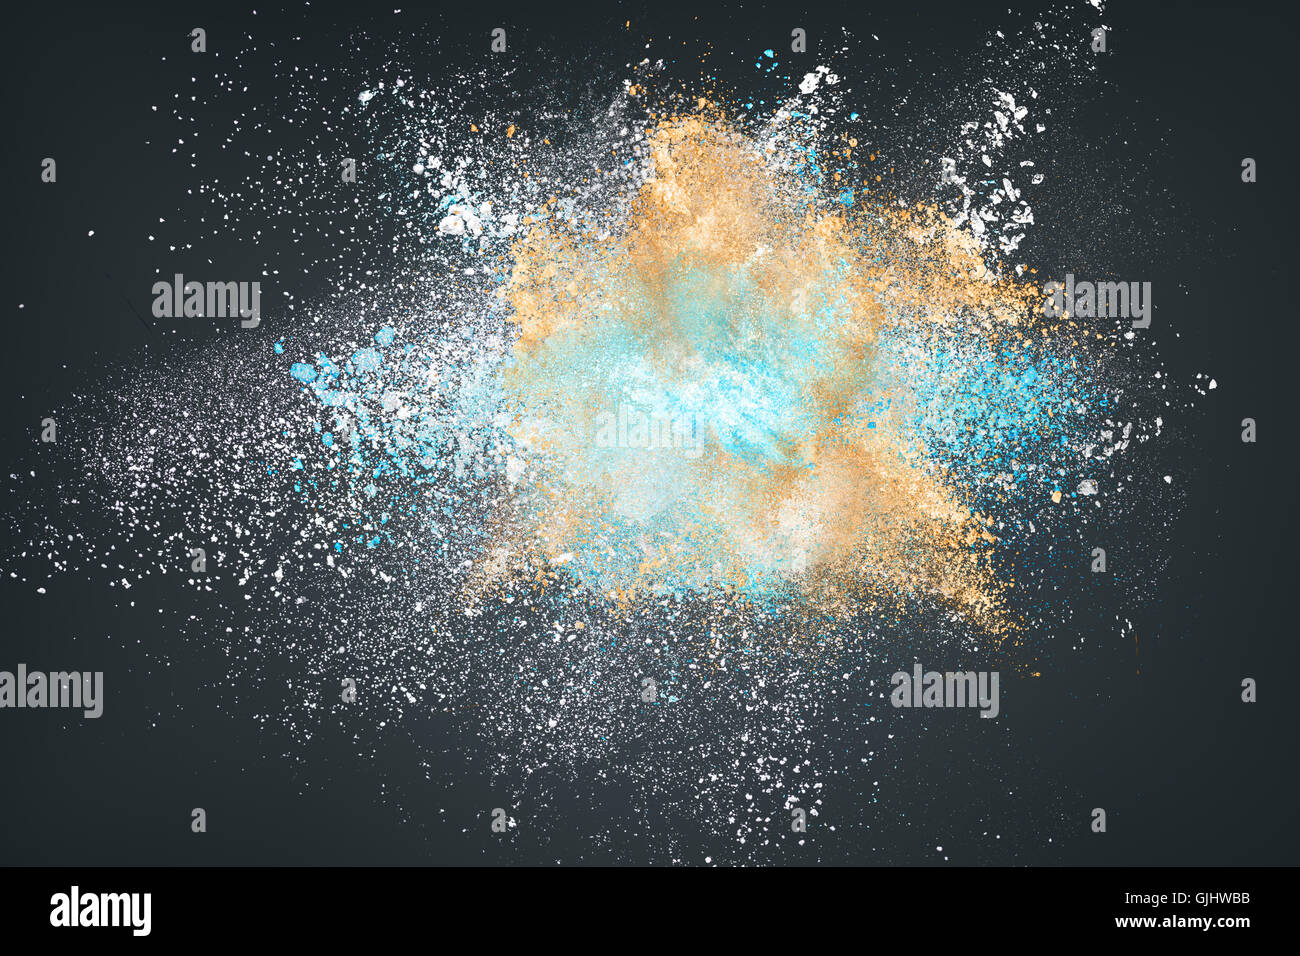 Abstract design of powder cloud texture explode over dark background Stock Photo